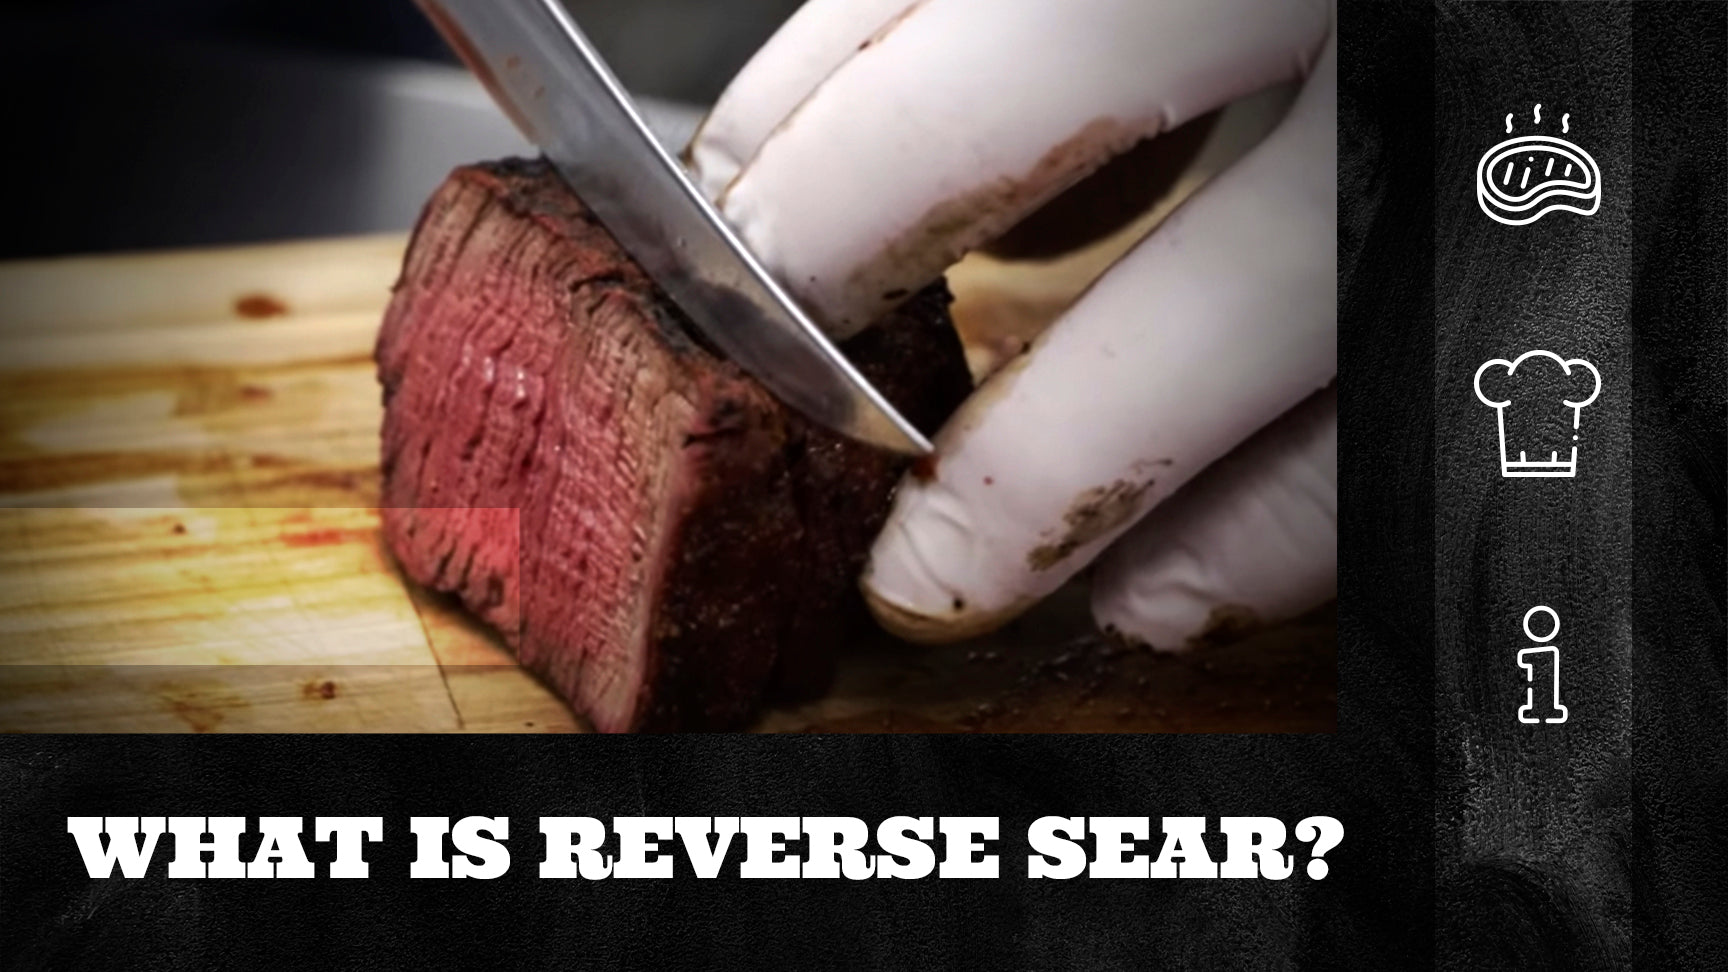 What Is Searing?